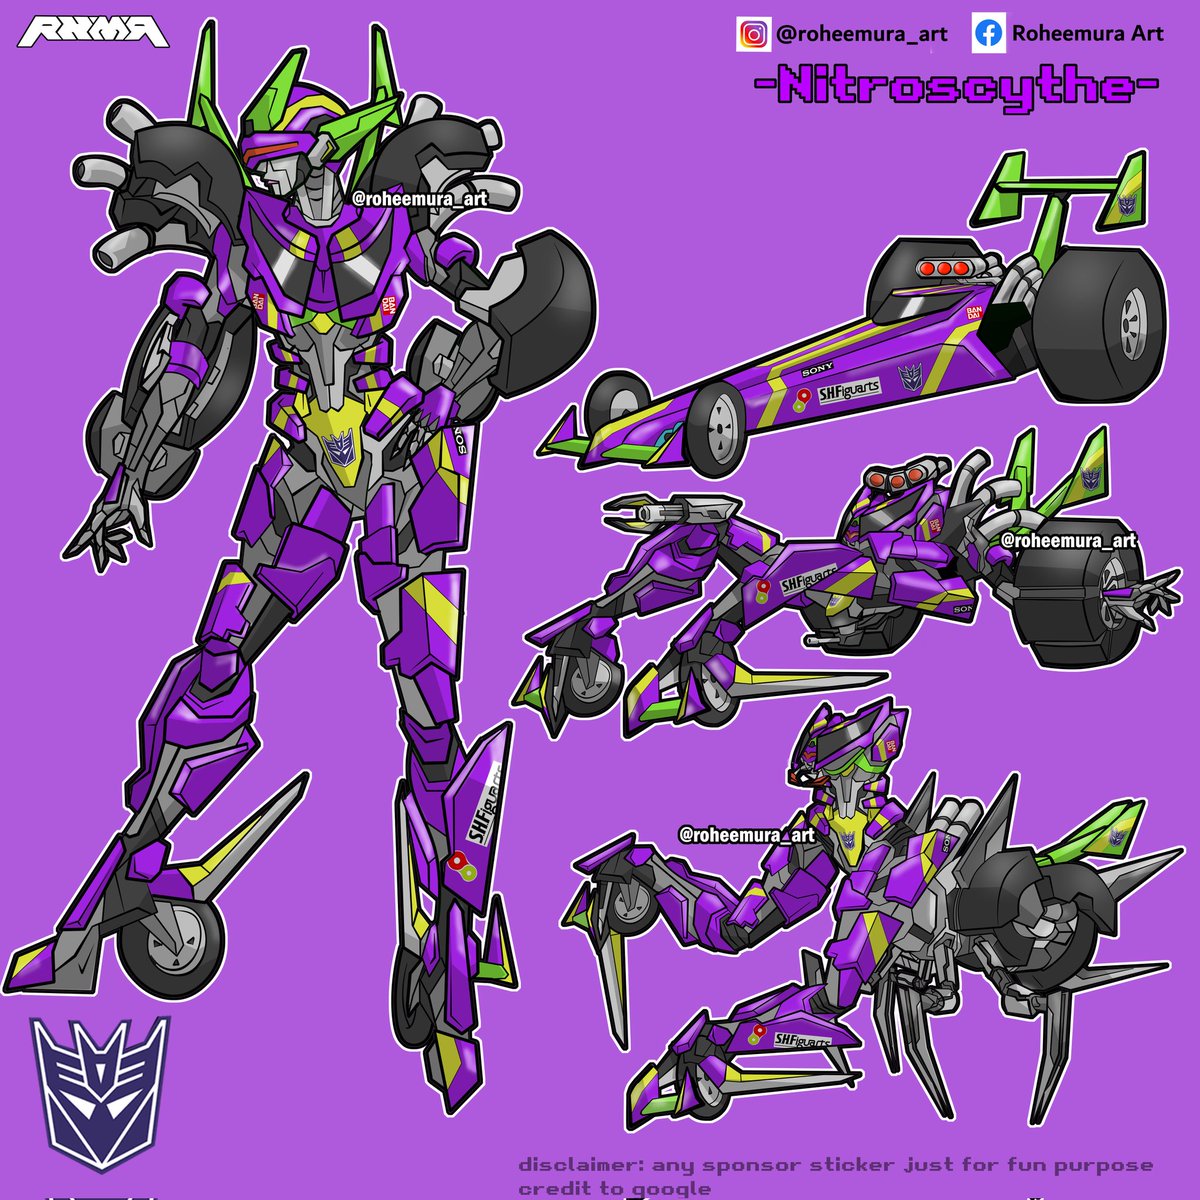 Throw back for the only transformer character i've done 😬😬😬
Decepticon nitroscythe. She is triple changer, and im using bayformers style for this. 
Any logo used here just for fun only. Took it from google
#transformers
#riseofthebeasts #decepticons #autobots